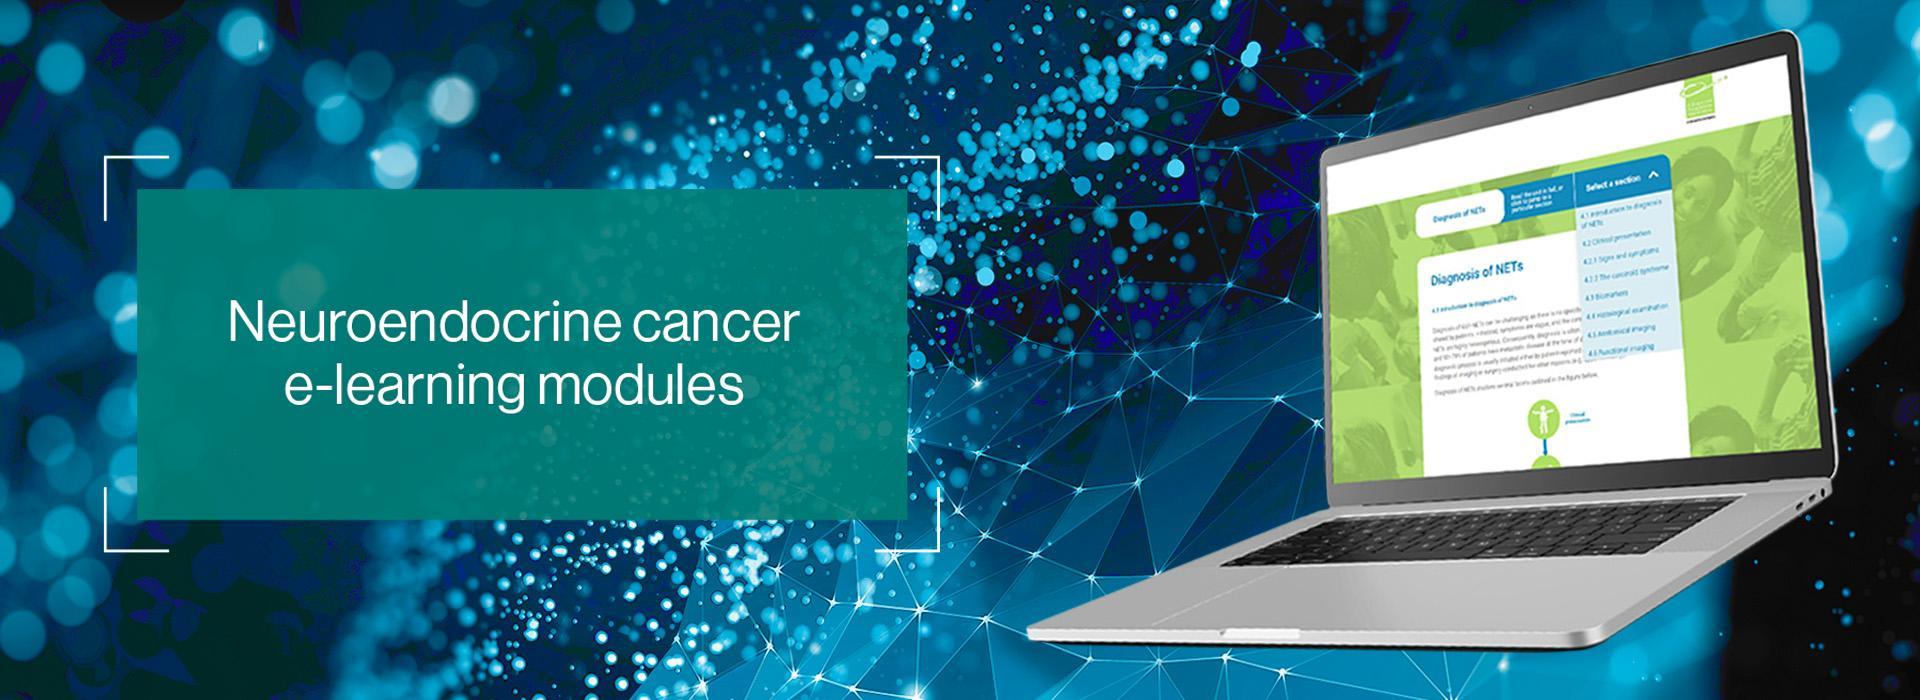 Top banner. Image of an example course module displayed on a laptop. Neuroendocrine cancer learning modules.